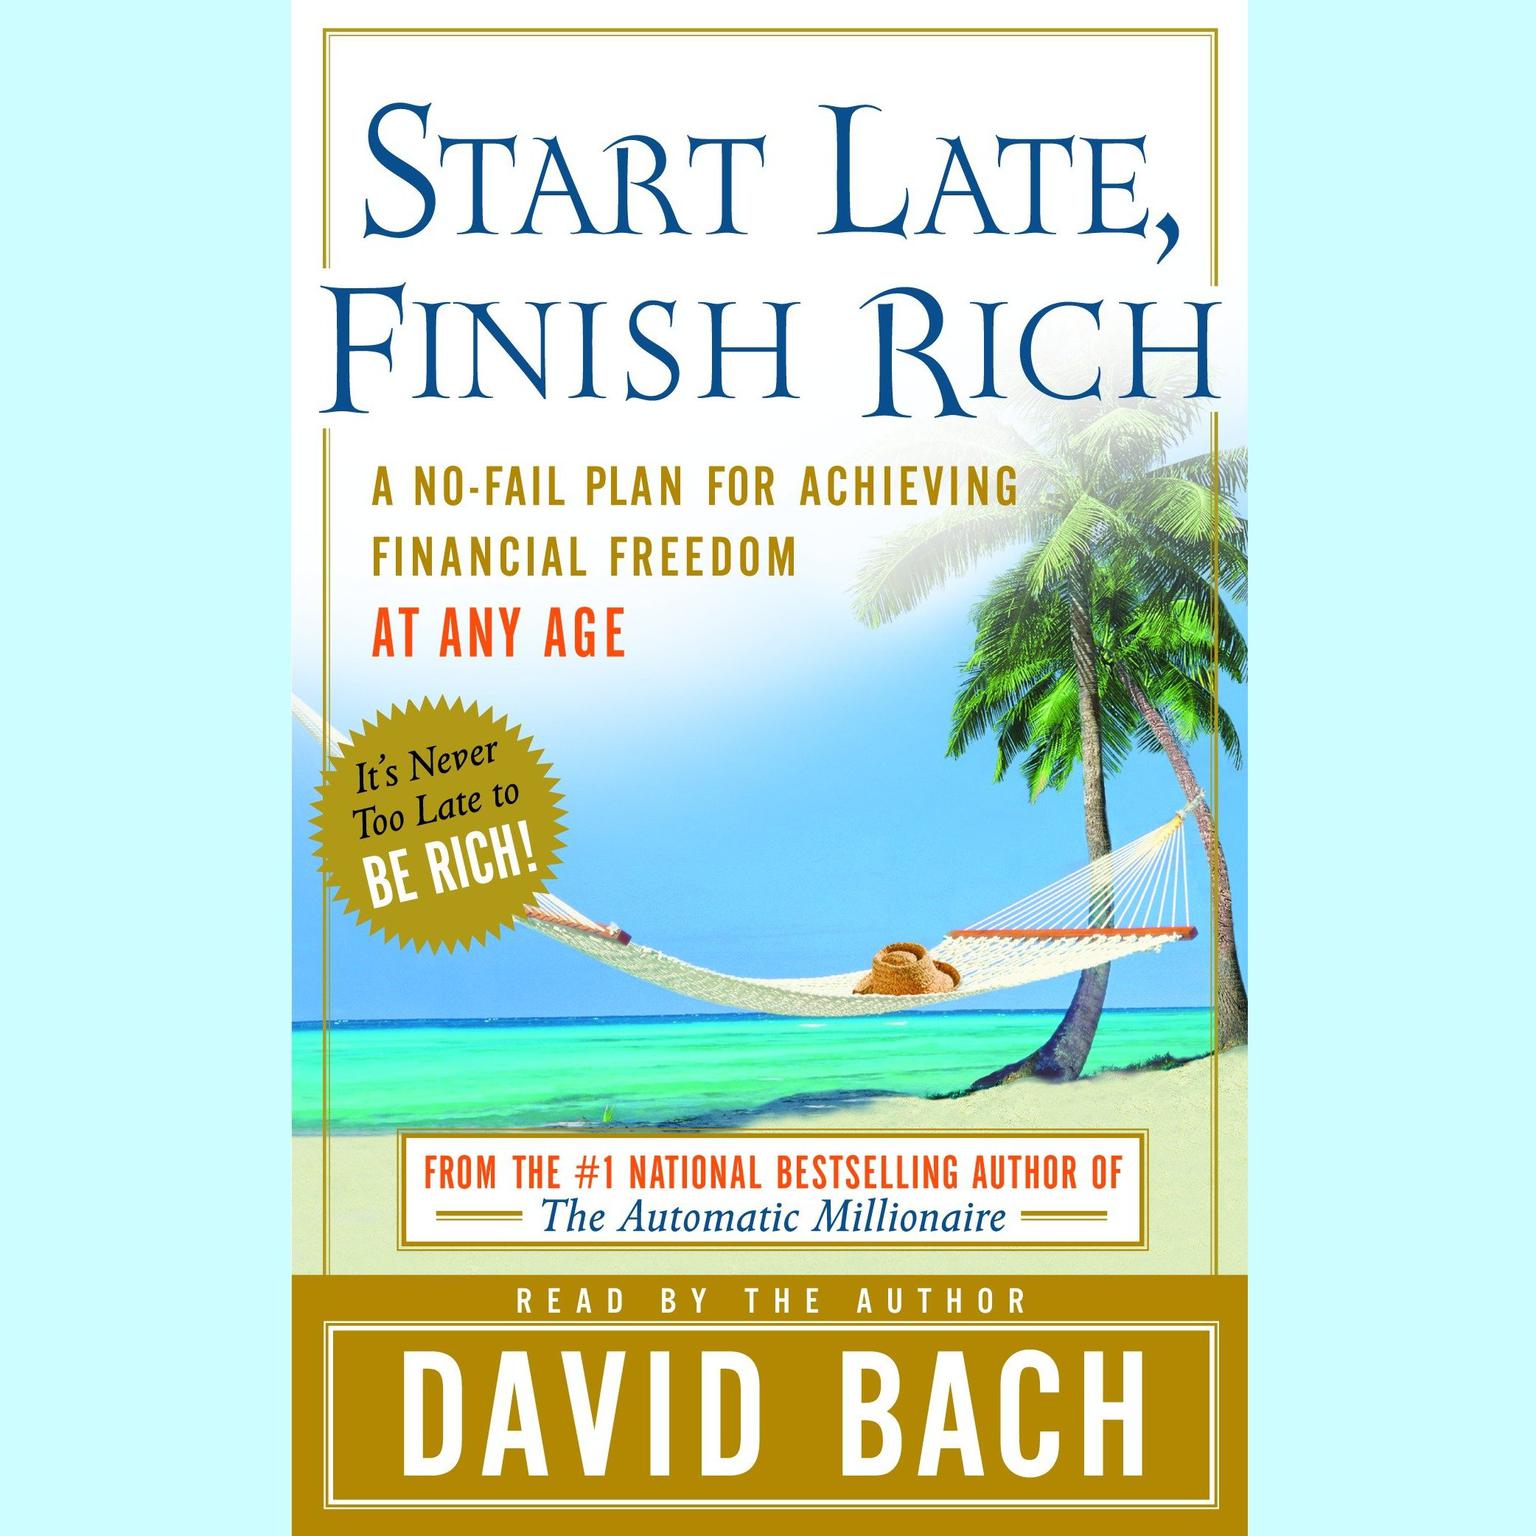 Start Late, Finish Rich (Abridged): A No-Fail Plan for Achieving Financial Freedom at Any Age Audiobook, by David Bach